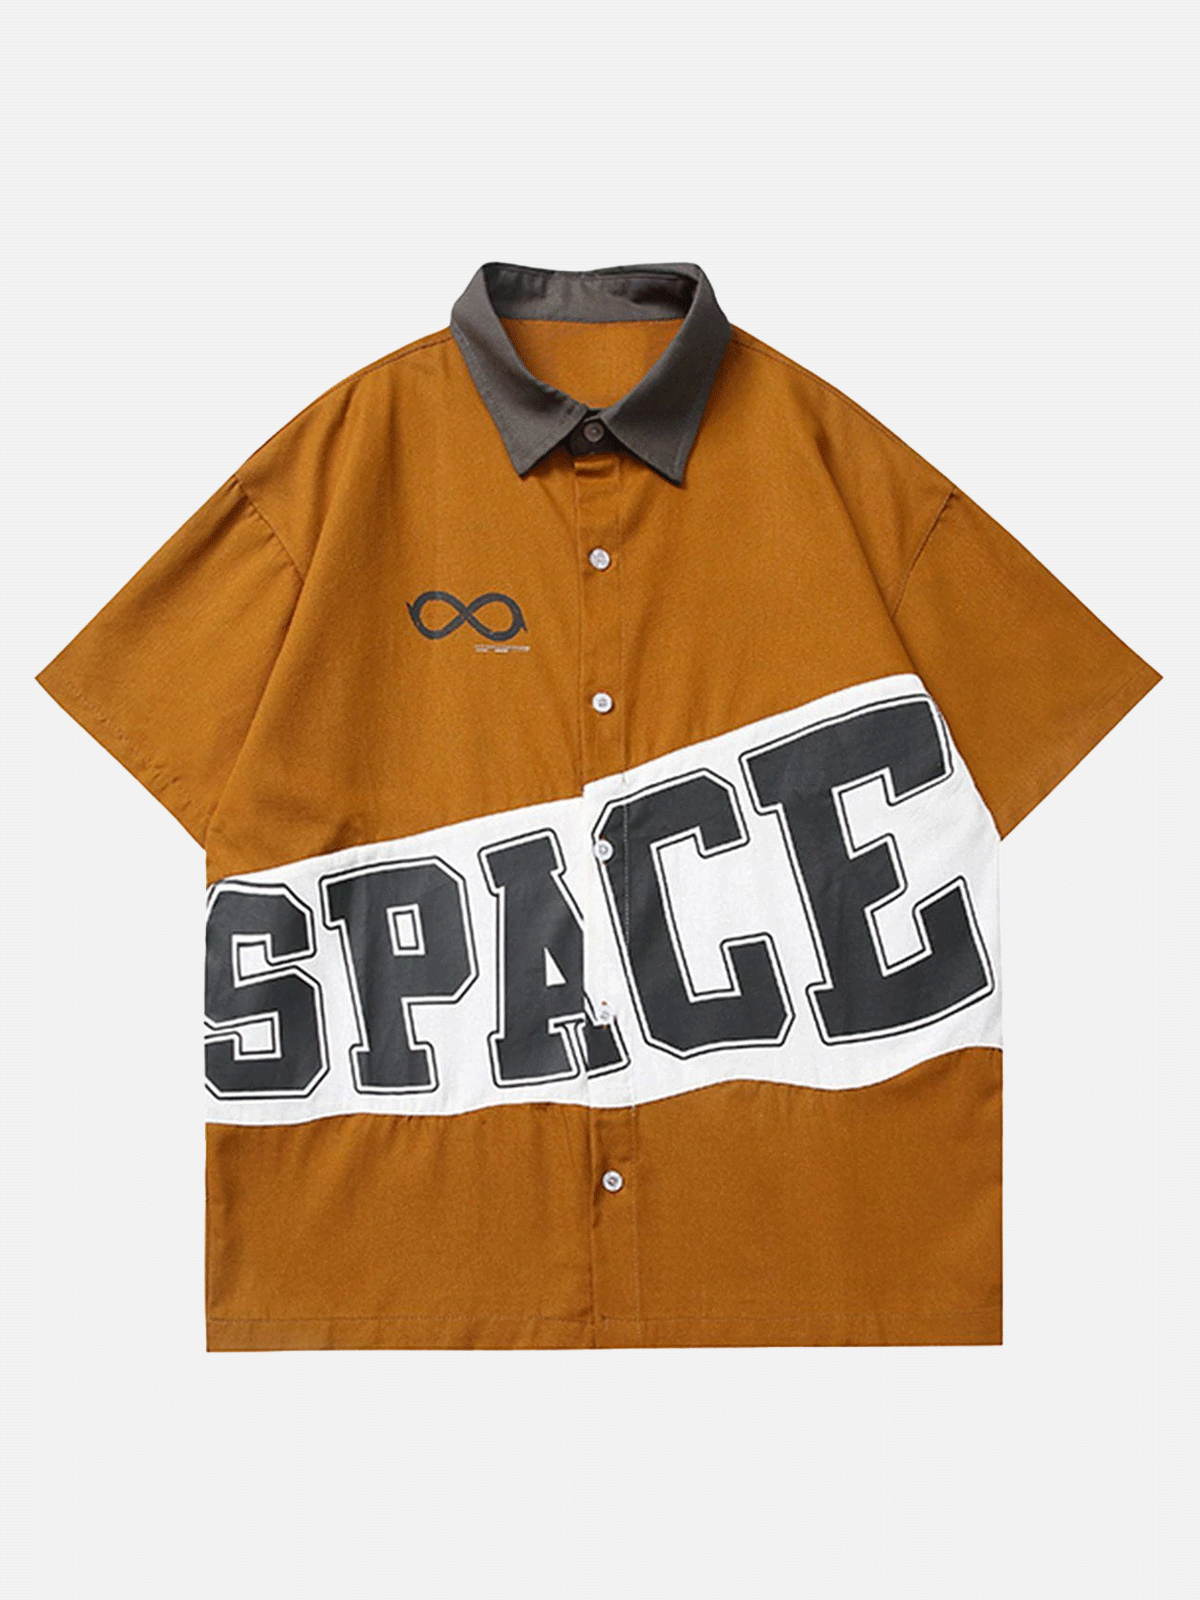 Majesda® - Patchwork Design "SPACE" Short Sleeve Shirt outfit ideas streetwear fashion